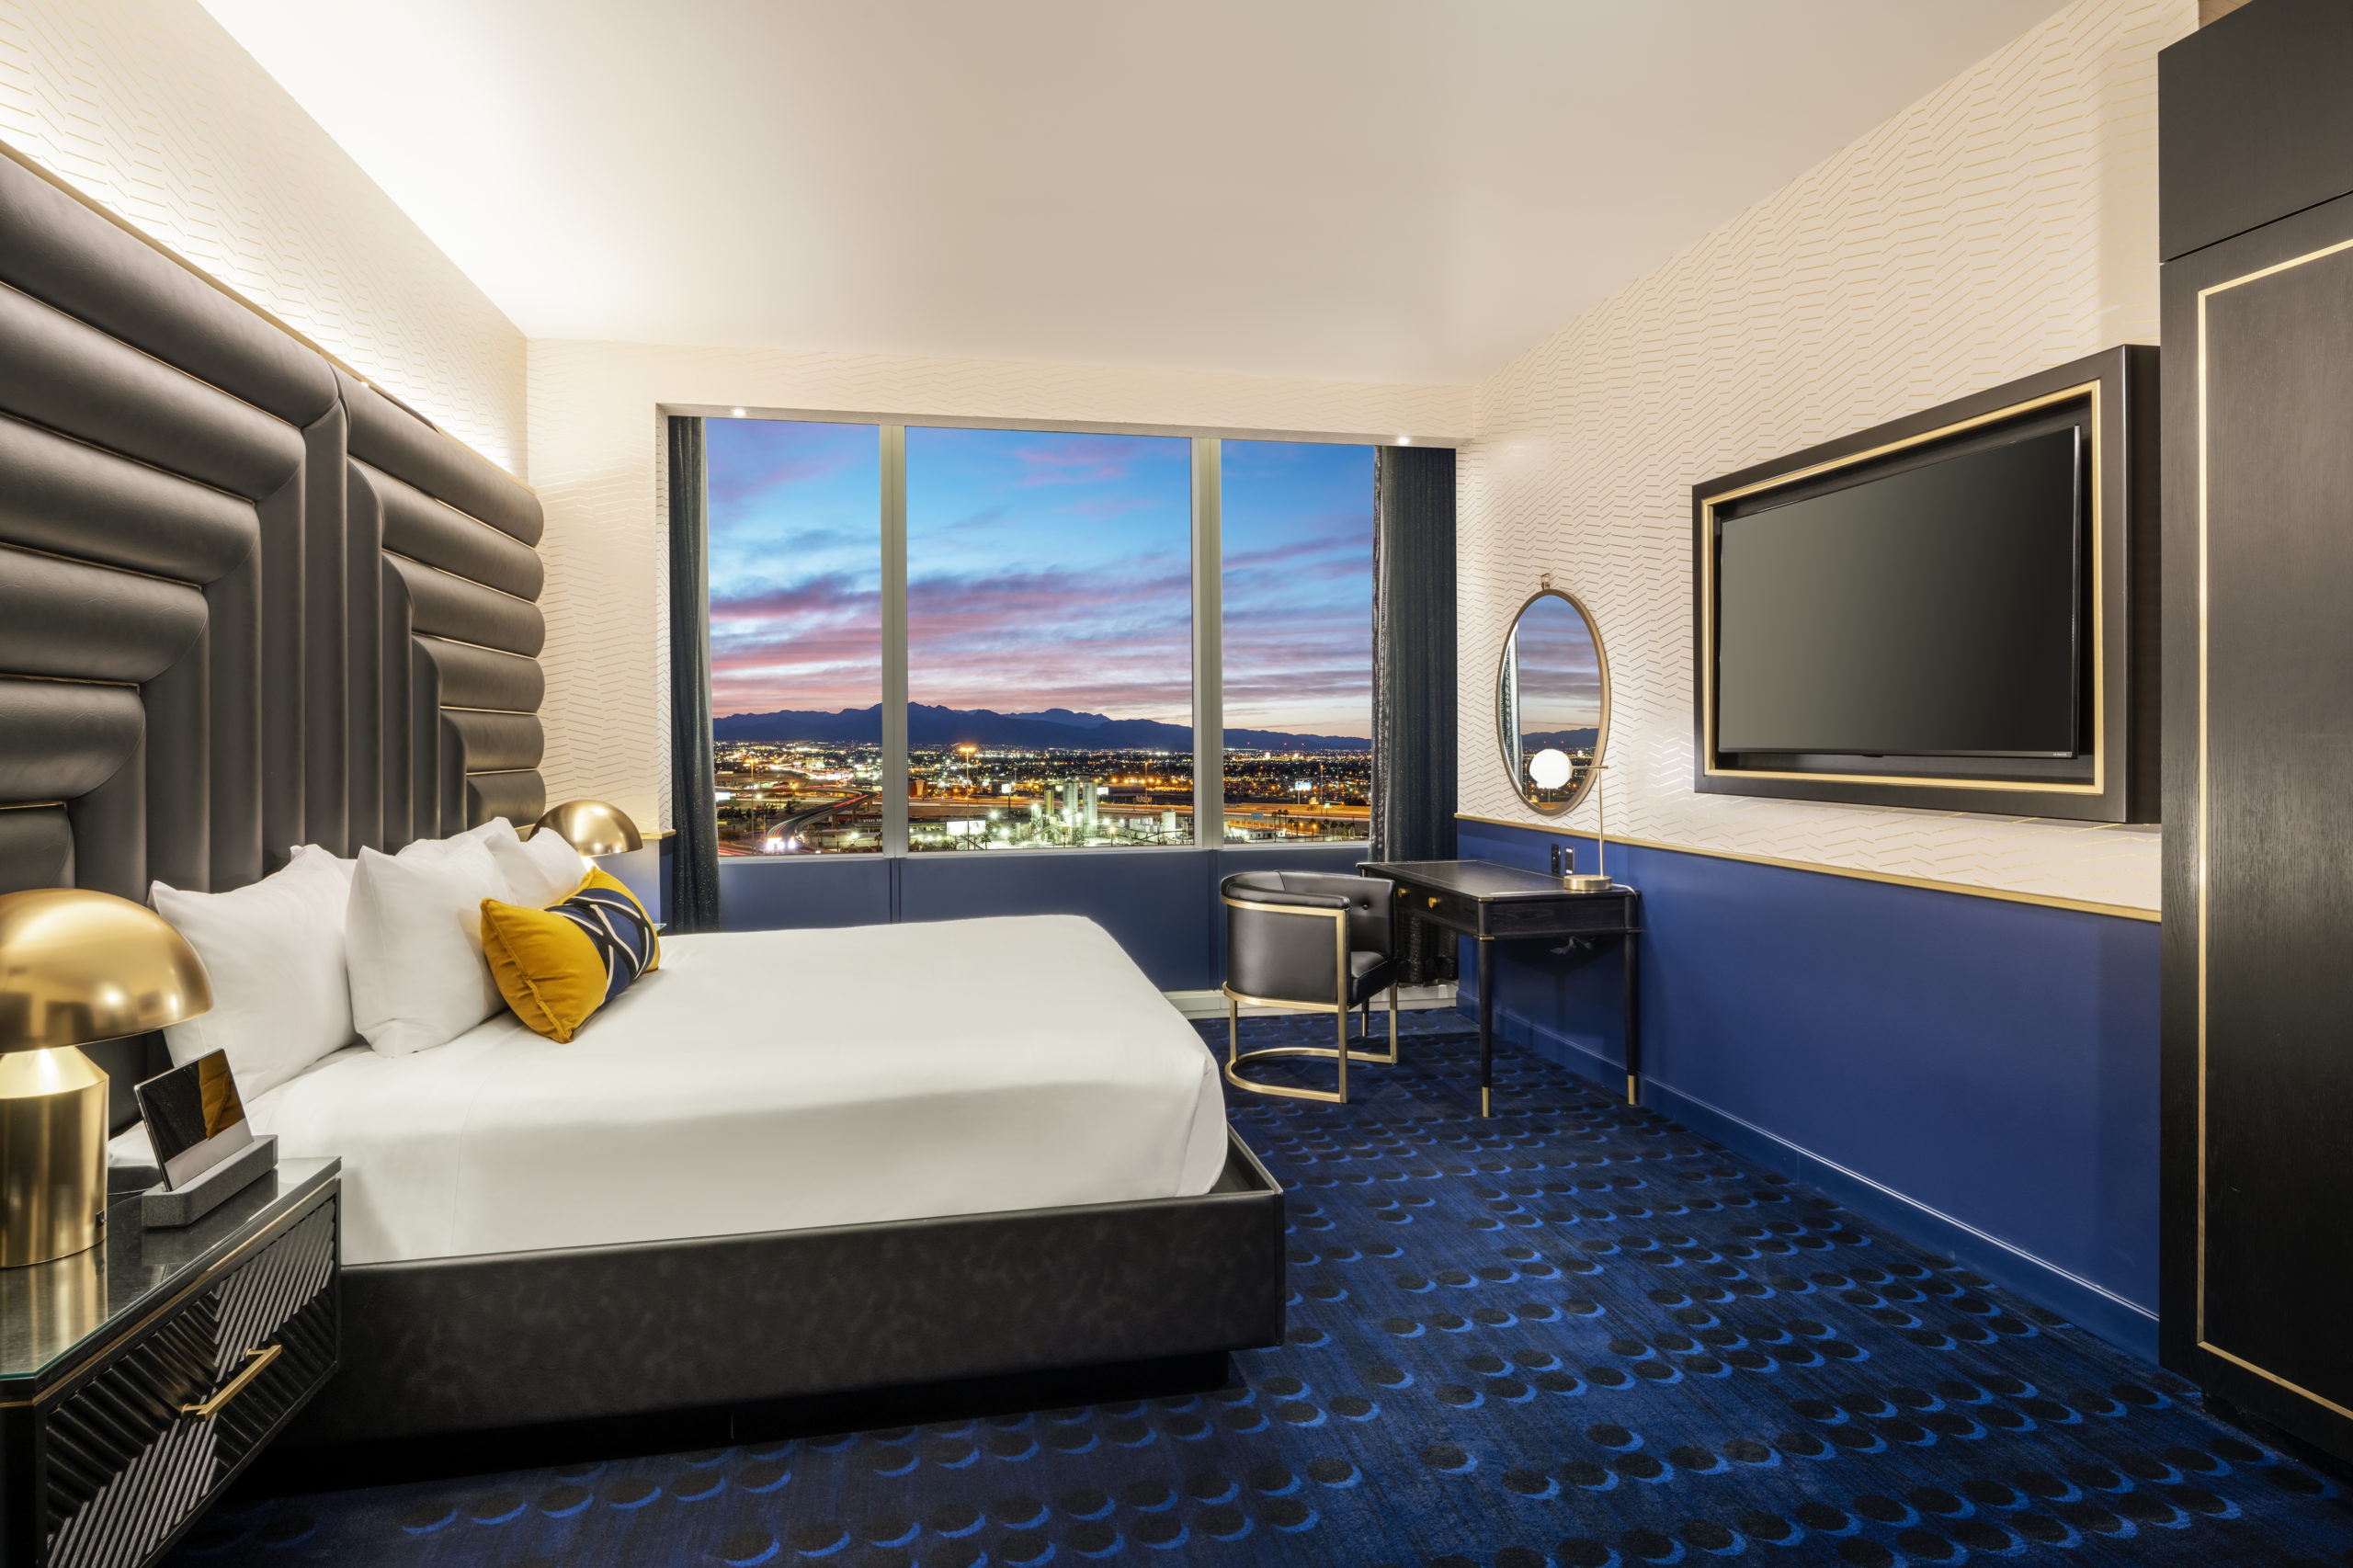 What Hotel Has the Most Rooms in Las Vegas?